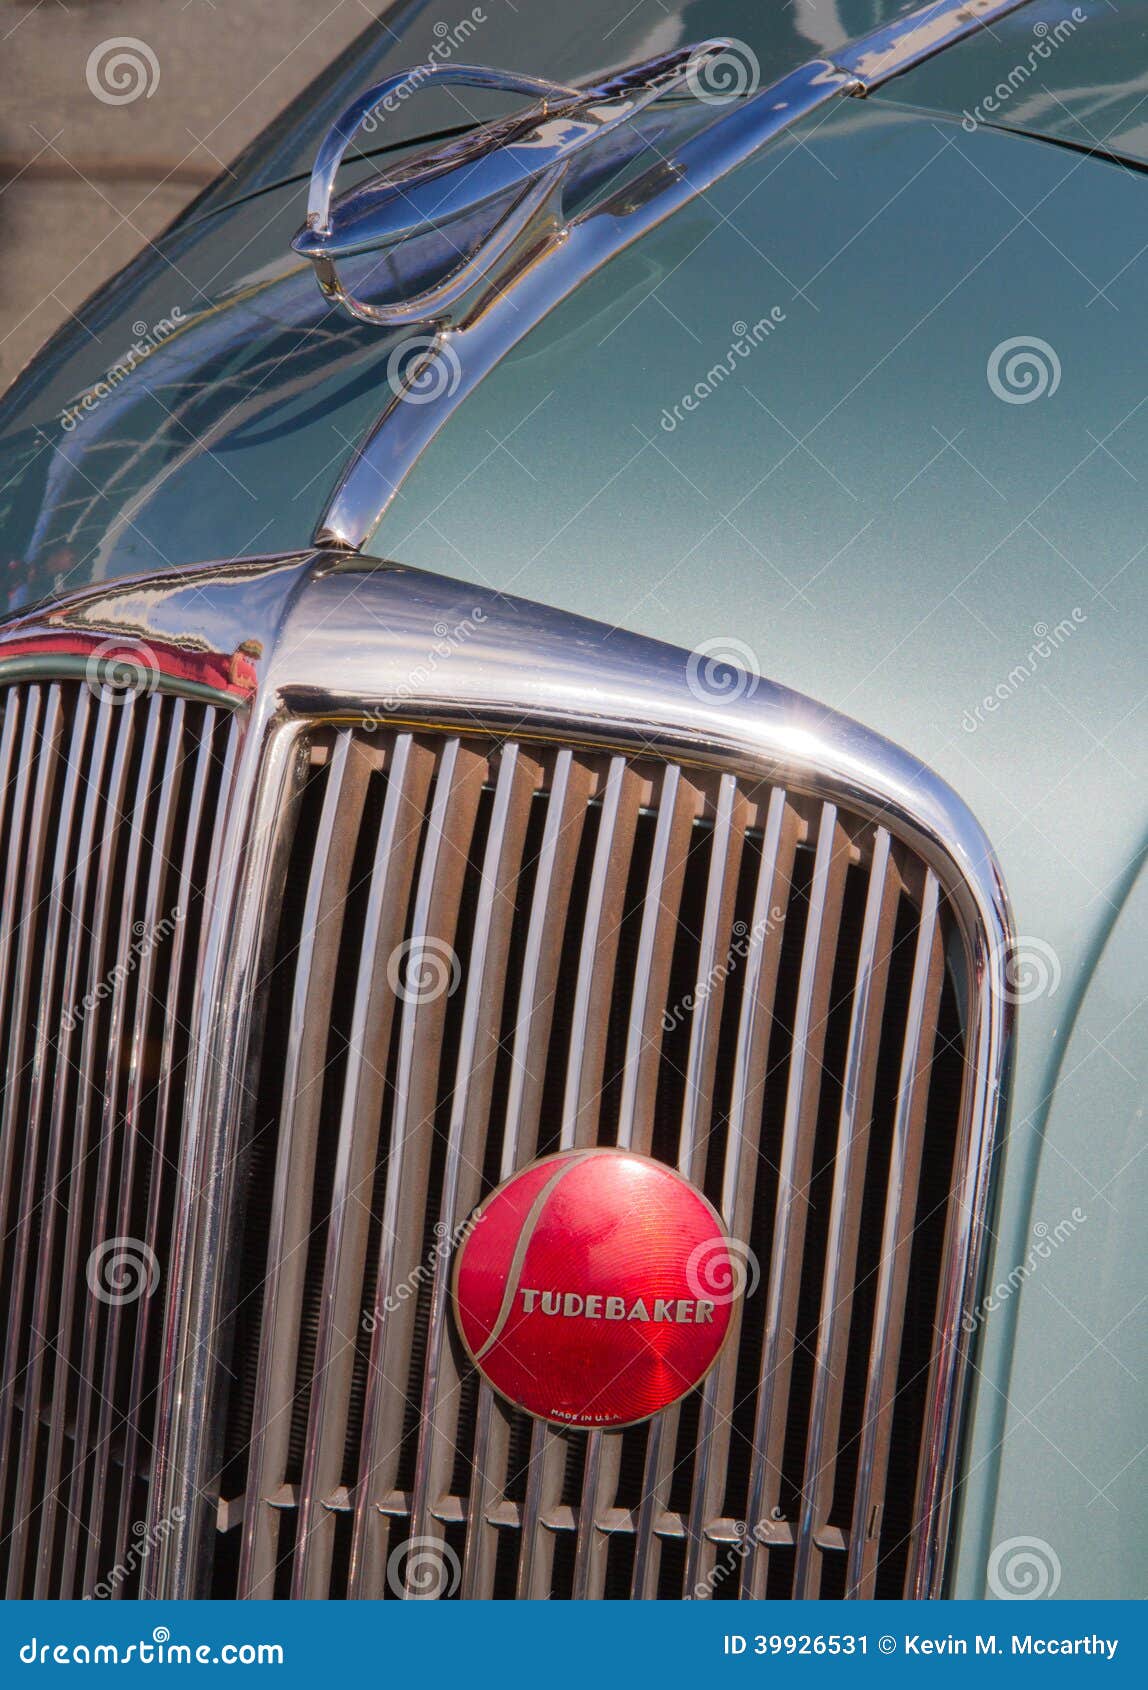 https://thumbs.dreamstime.com/z/classic-studebaker-automobile-concord-nc-april-closeup-view-hood-ornament-front-grille-dictator-auto-display-39926531.jpg